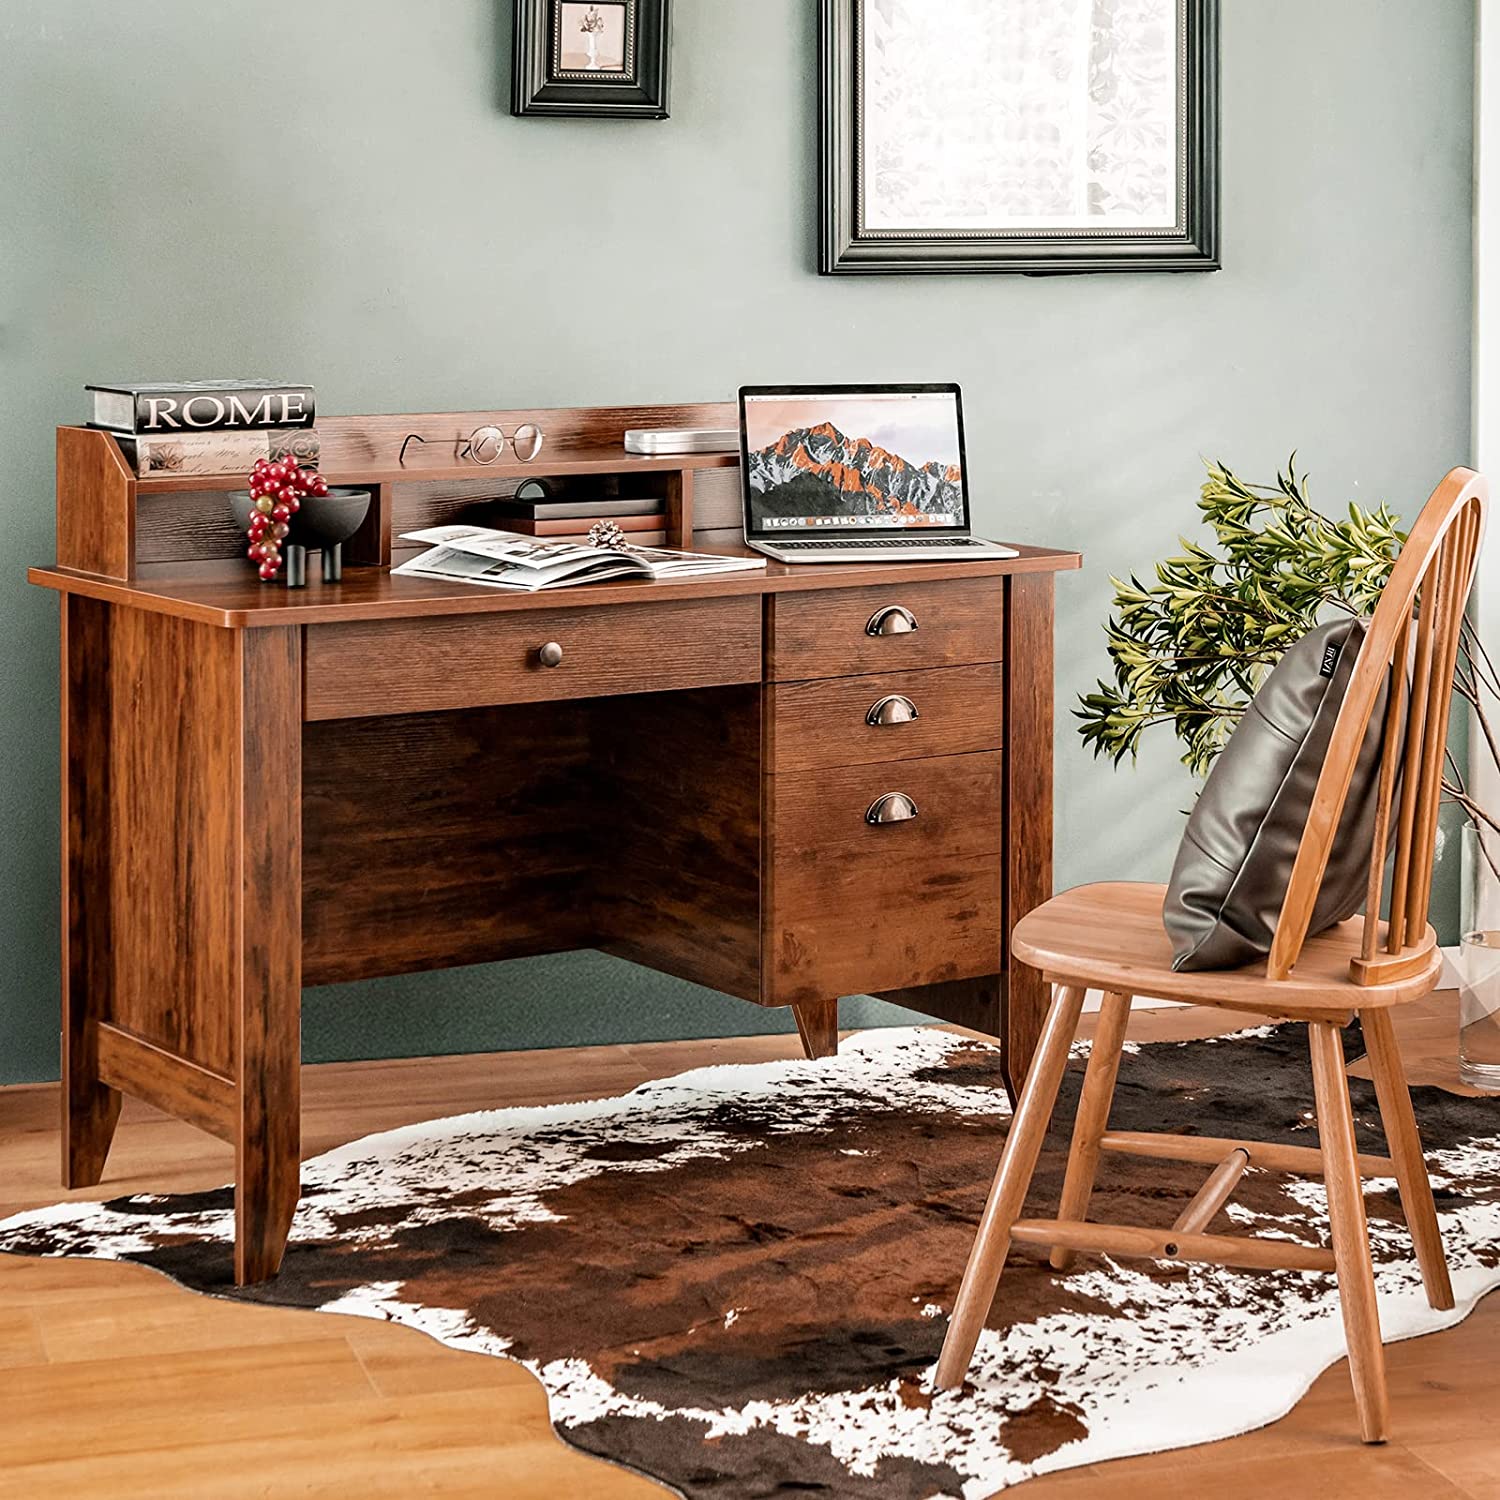 Chairliving Vintage Wooden Computer Desk Home Office Desk Executive Desk Writing Study Desk with 4 Storage Drawers and Hutch